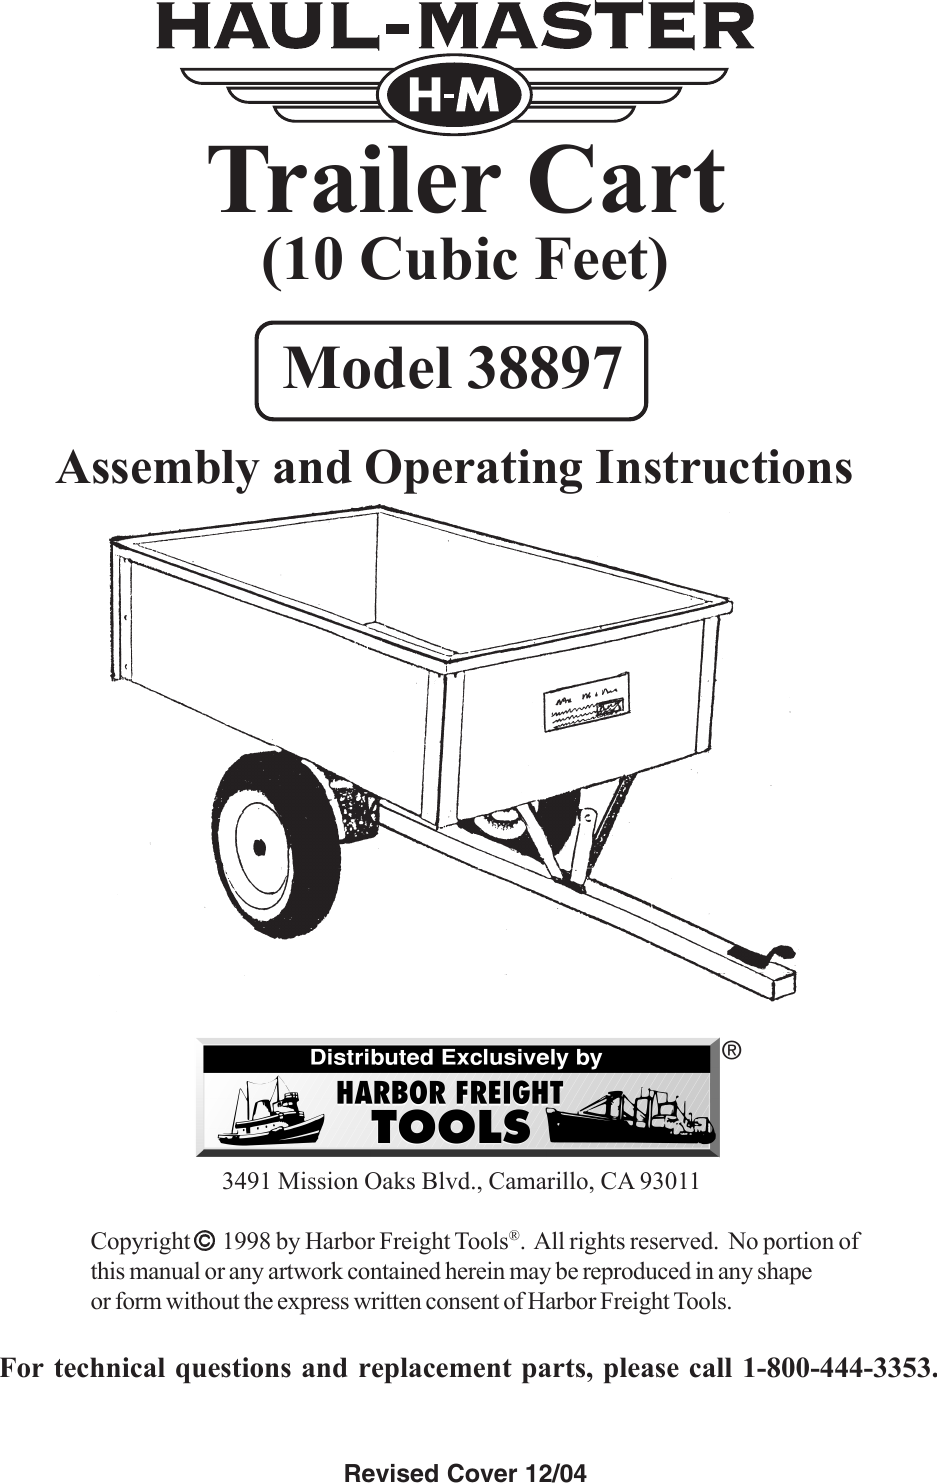 Page 1 of 9 - Harbor-Freight Harbor-Freight-10-Cubic-Ft-Heavy-Duty-Trailer-Cart-Product-Manual- 38897 Trailer Cart Manual  Harbor-freight-10-cubic-ft-heavy-duty-trailer-cart-product-manual